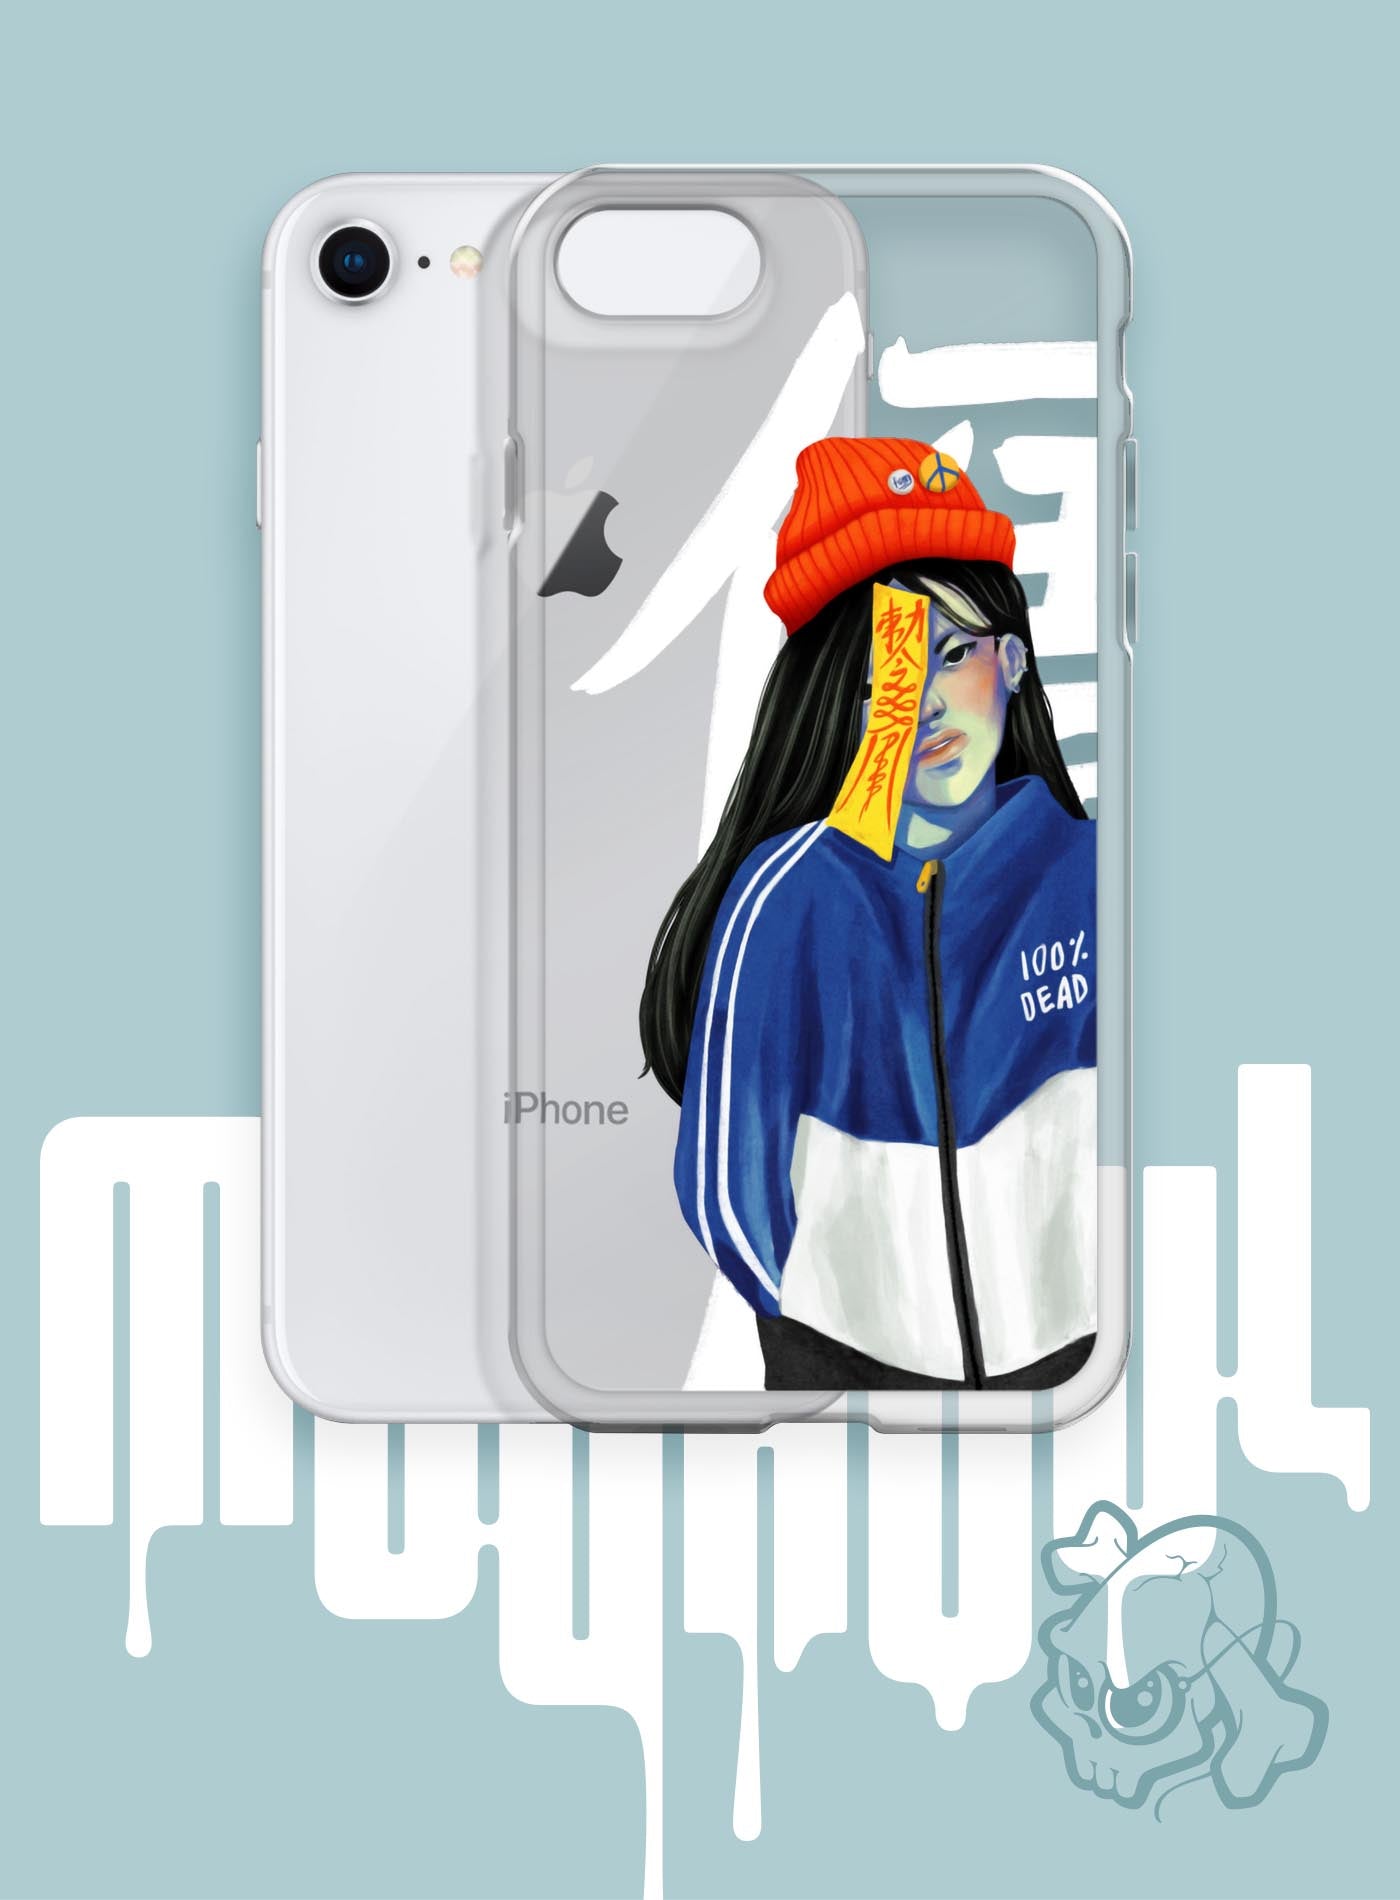 iPhone case featuring a front print of a jiangshi Chinese zombie in urban outfit illustrated by Aiken Lao.